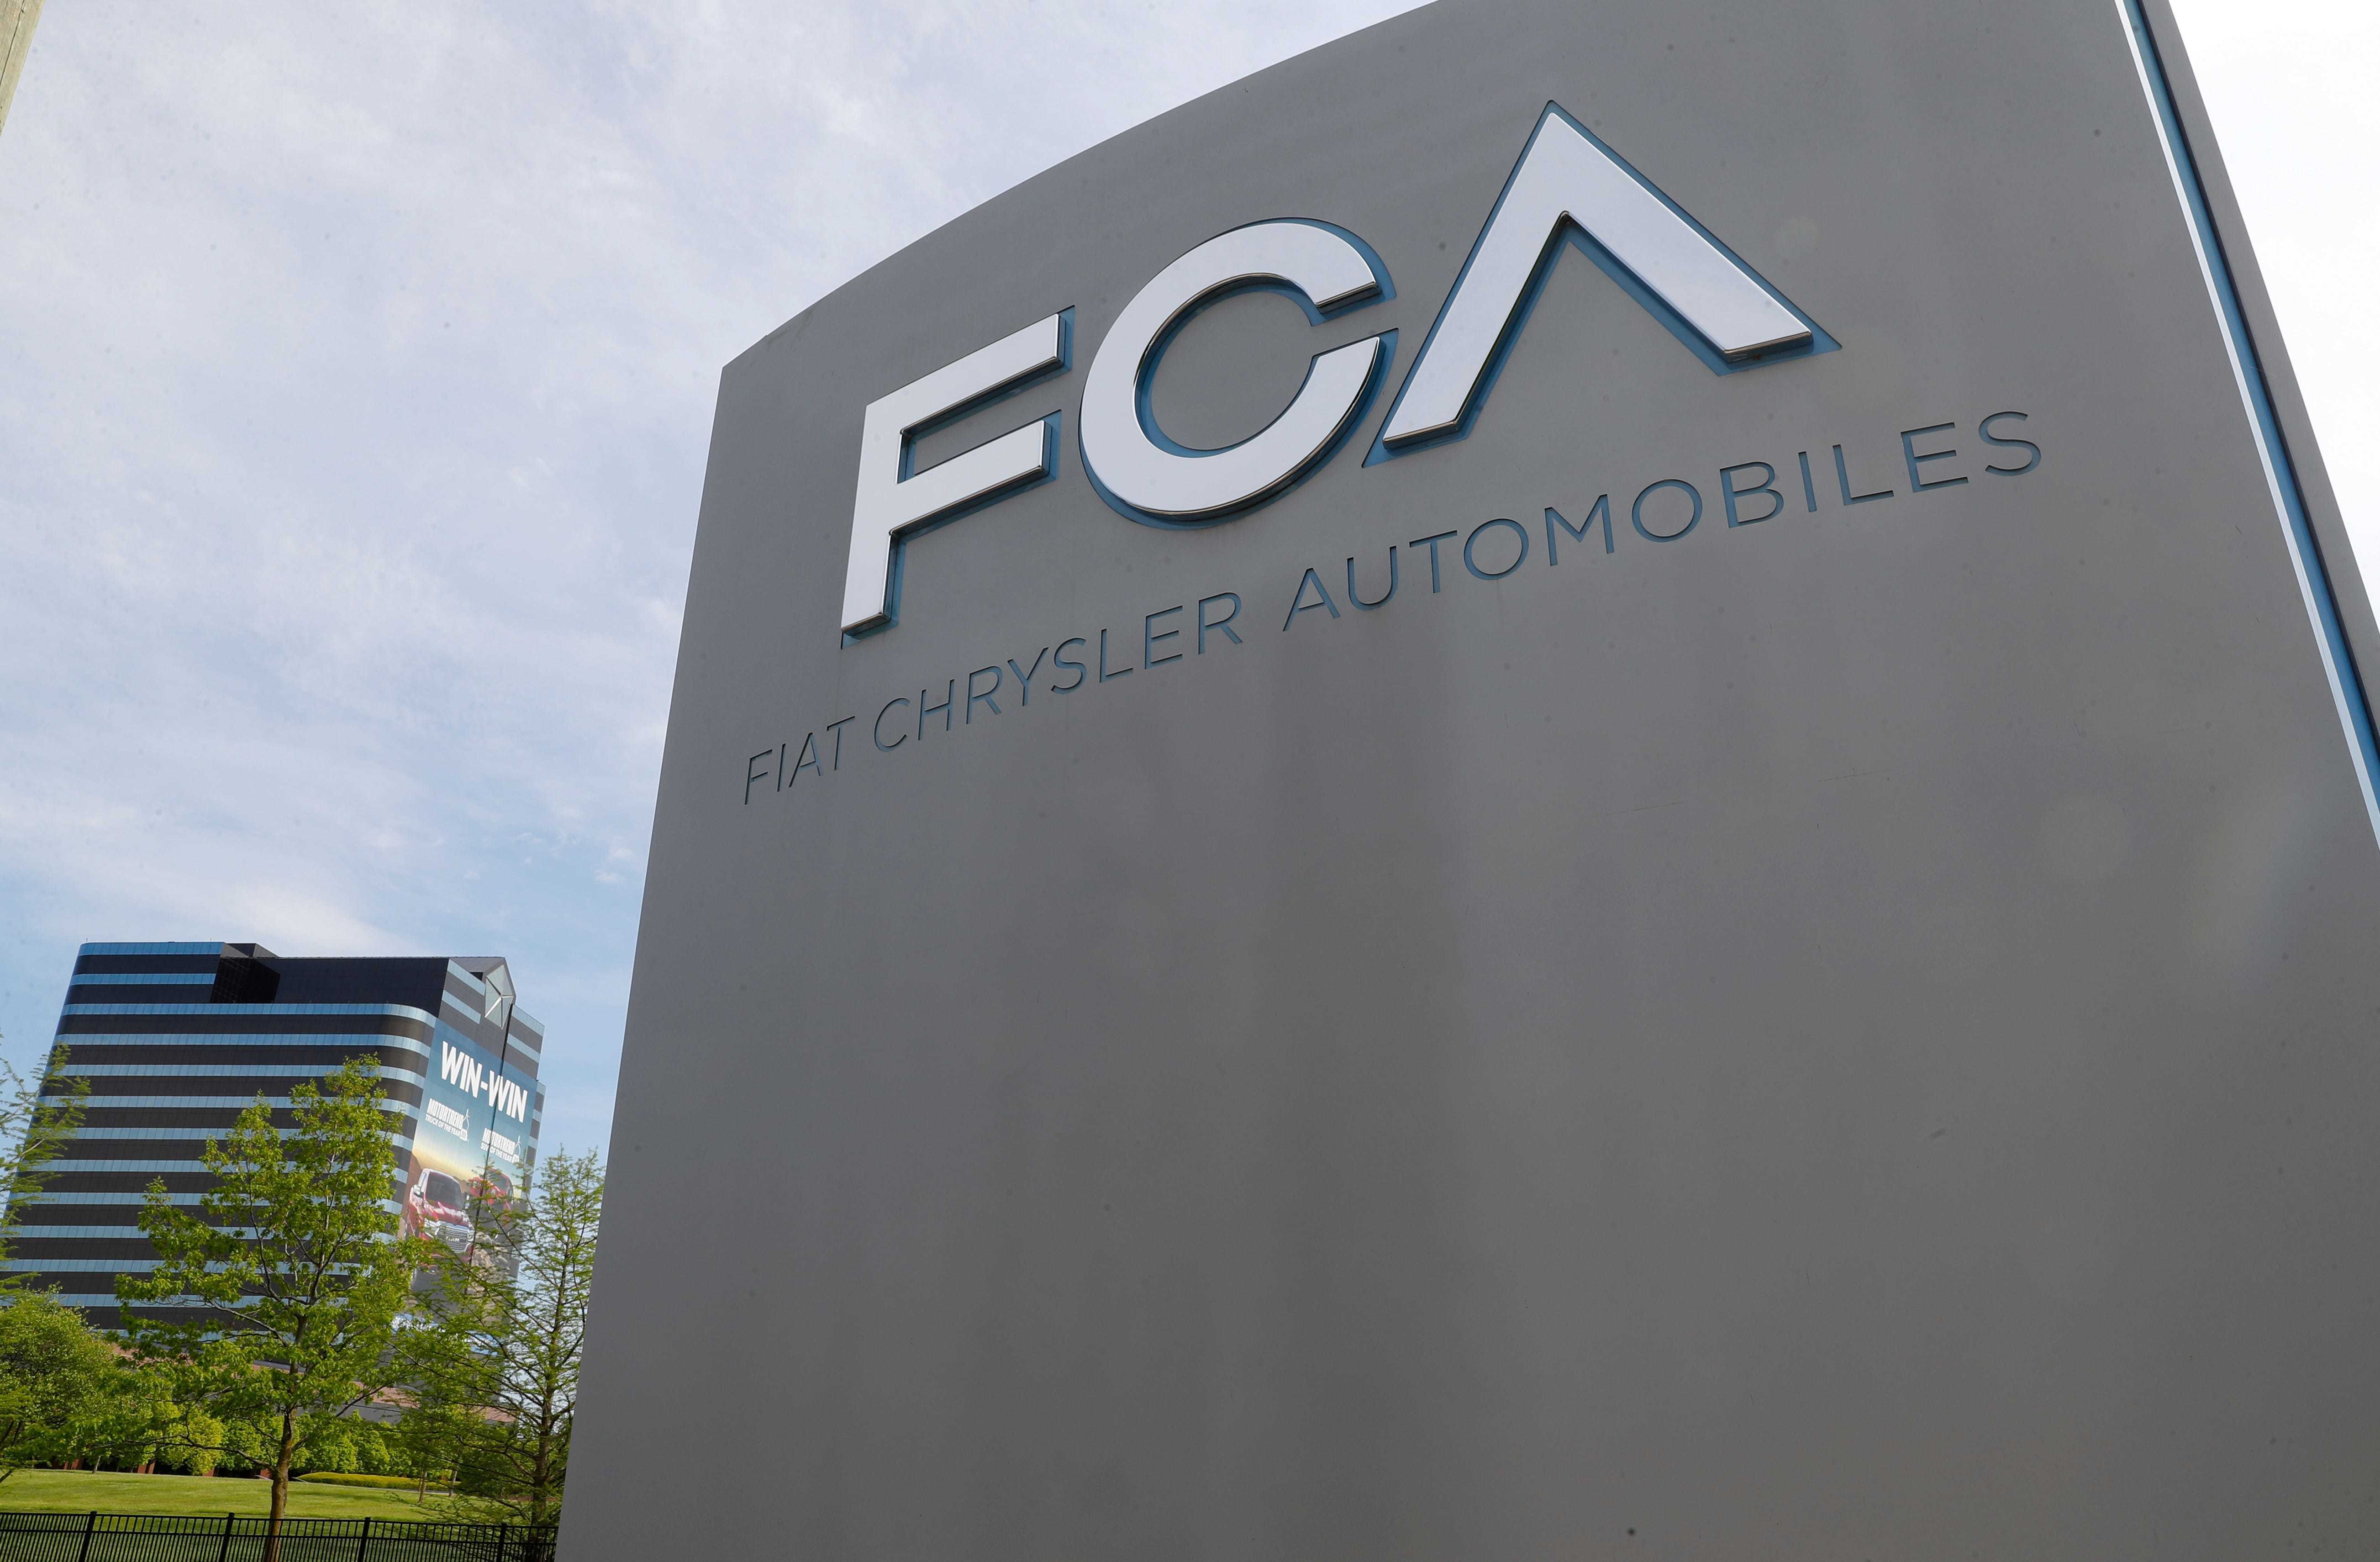 Fiat Chrysler Automobiles will pay $40 million to settle charges that it falsely reported the number of new vehicles sold each month in the United States.